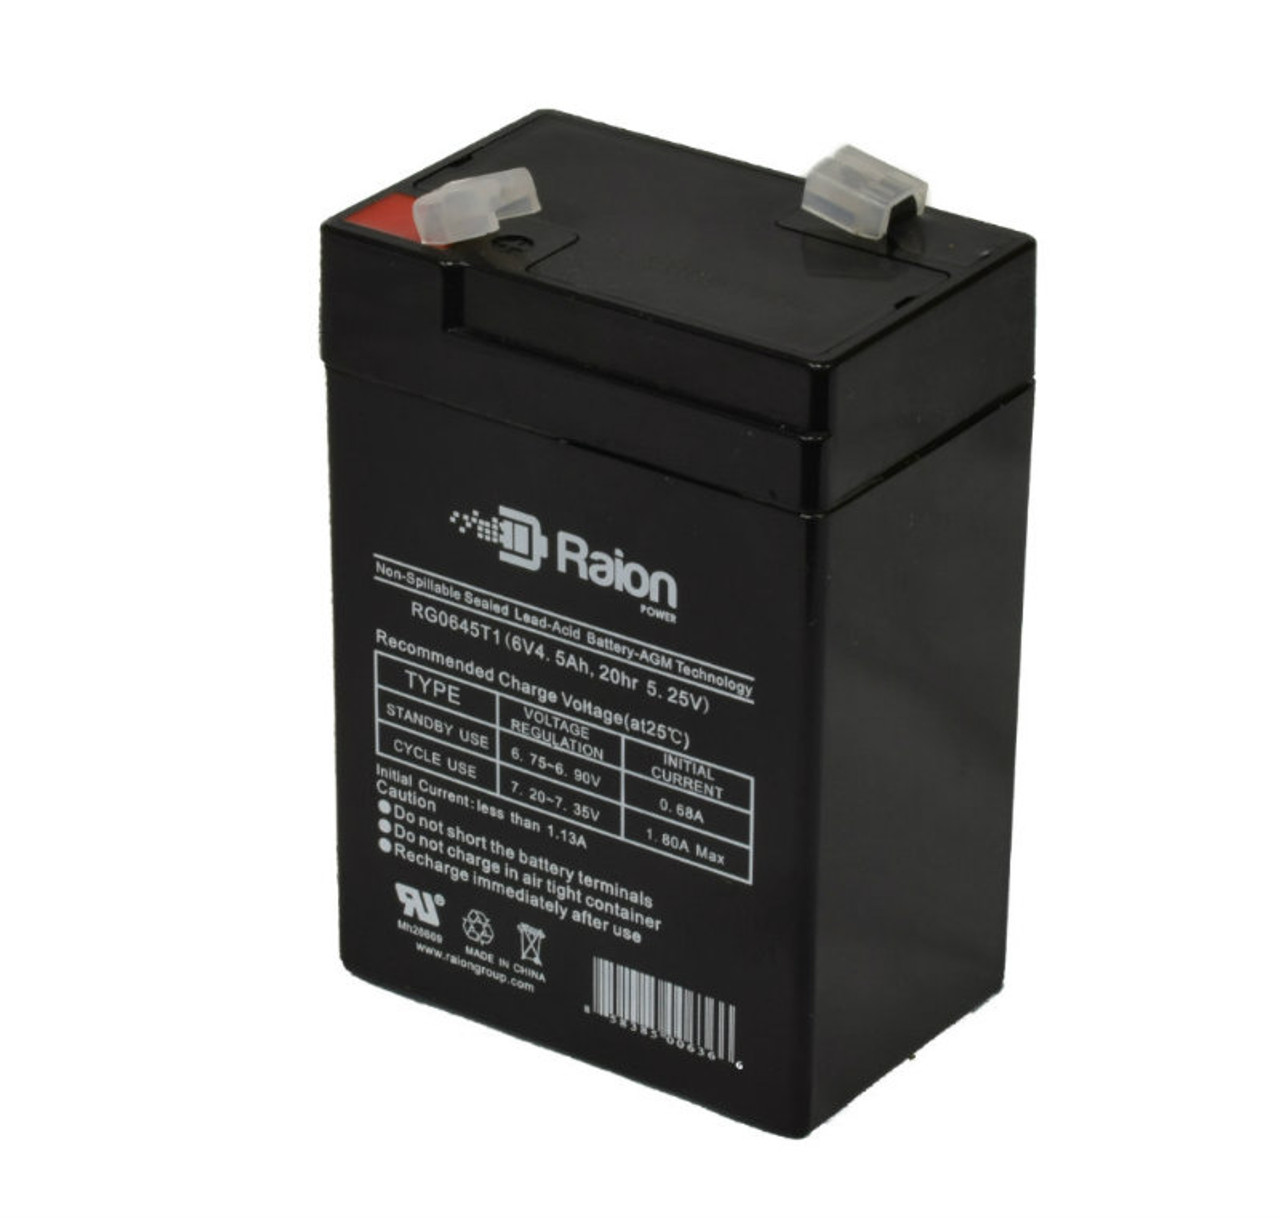 Raion Power RG0645T1 6V 4.5Ah Replacement Battery Cartridge for Lithonia XS1REL